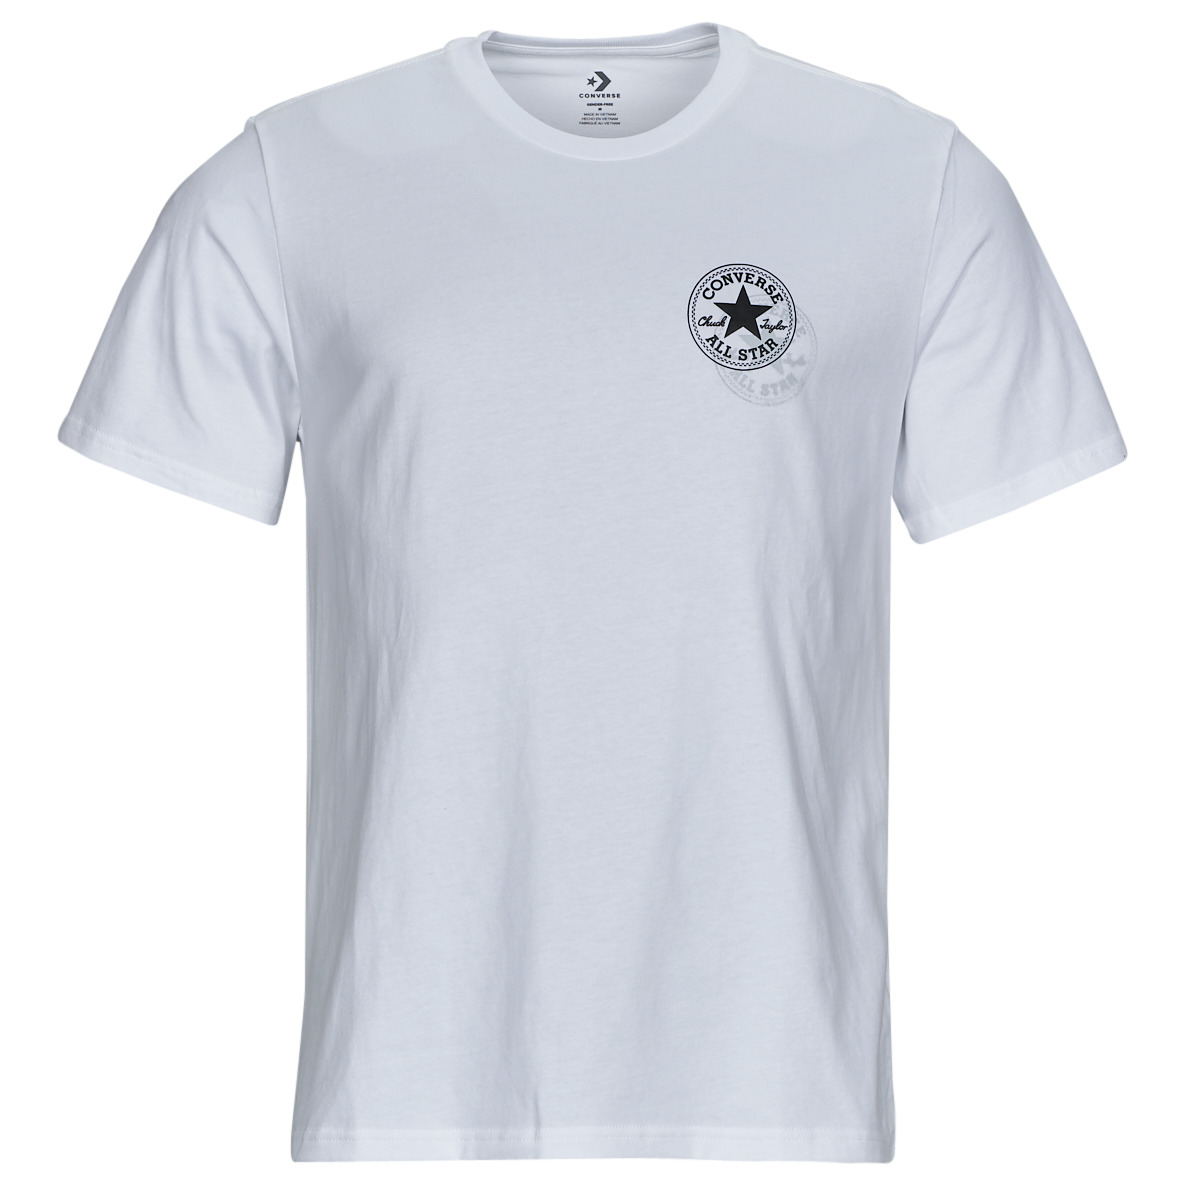 Buy White Tshirts for Boys by CONVERSE Online